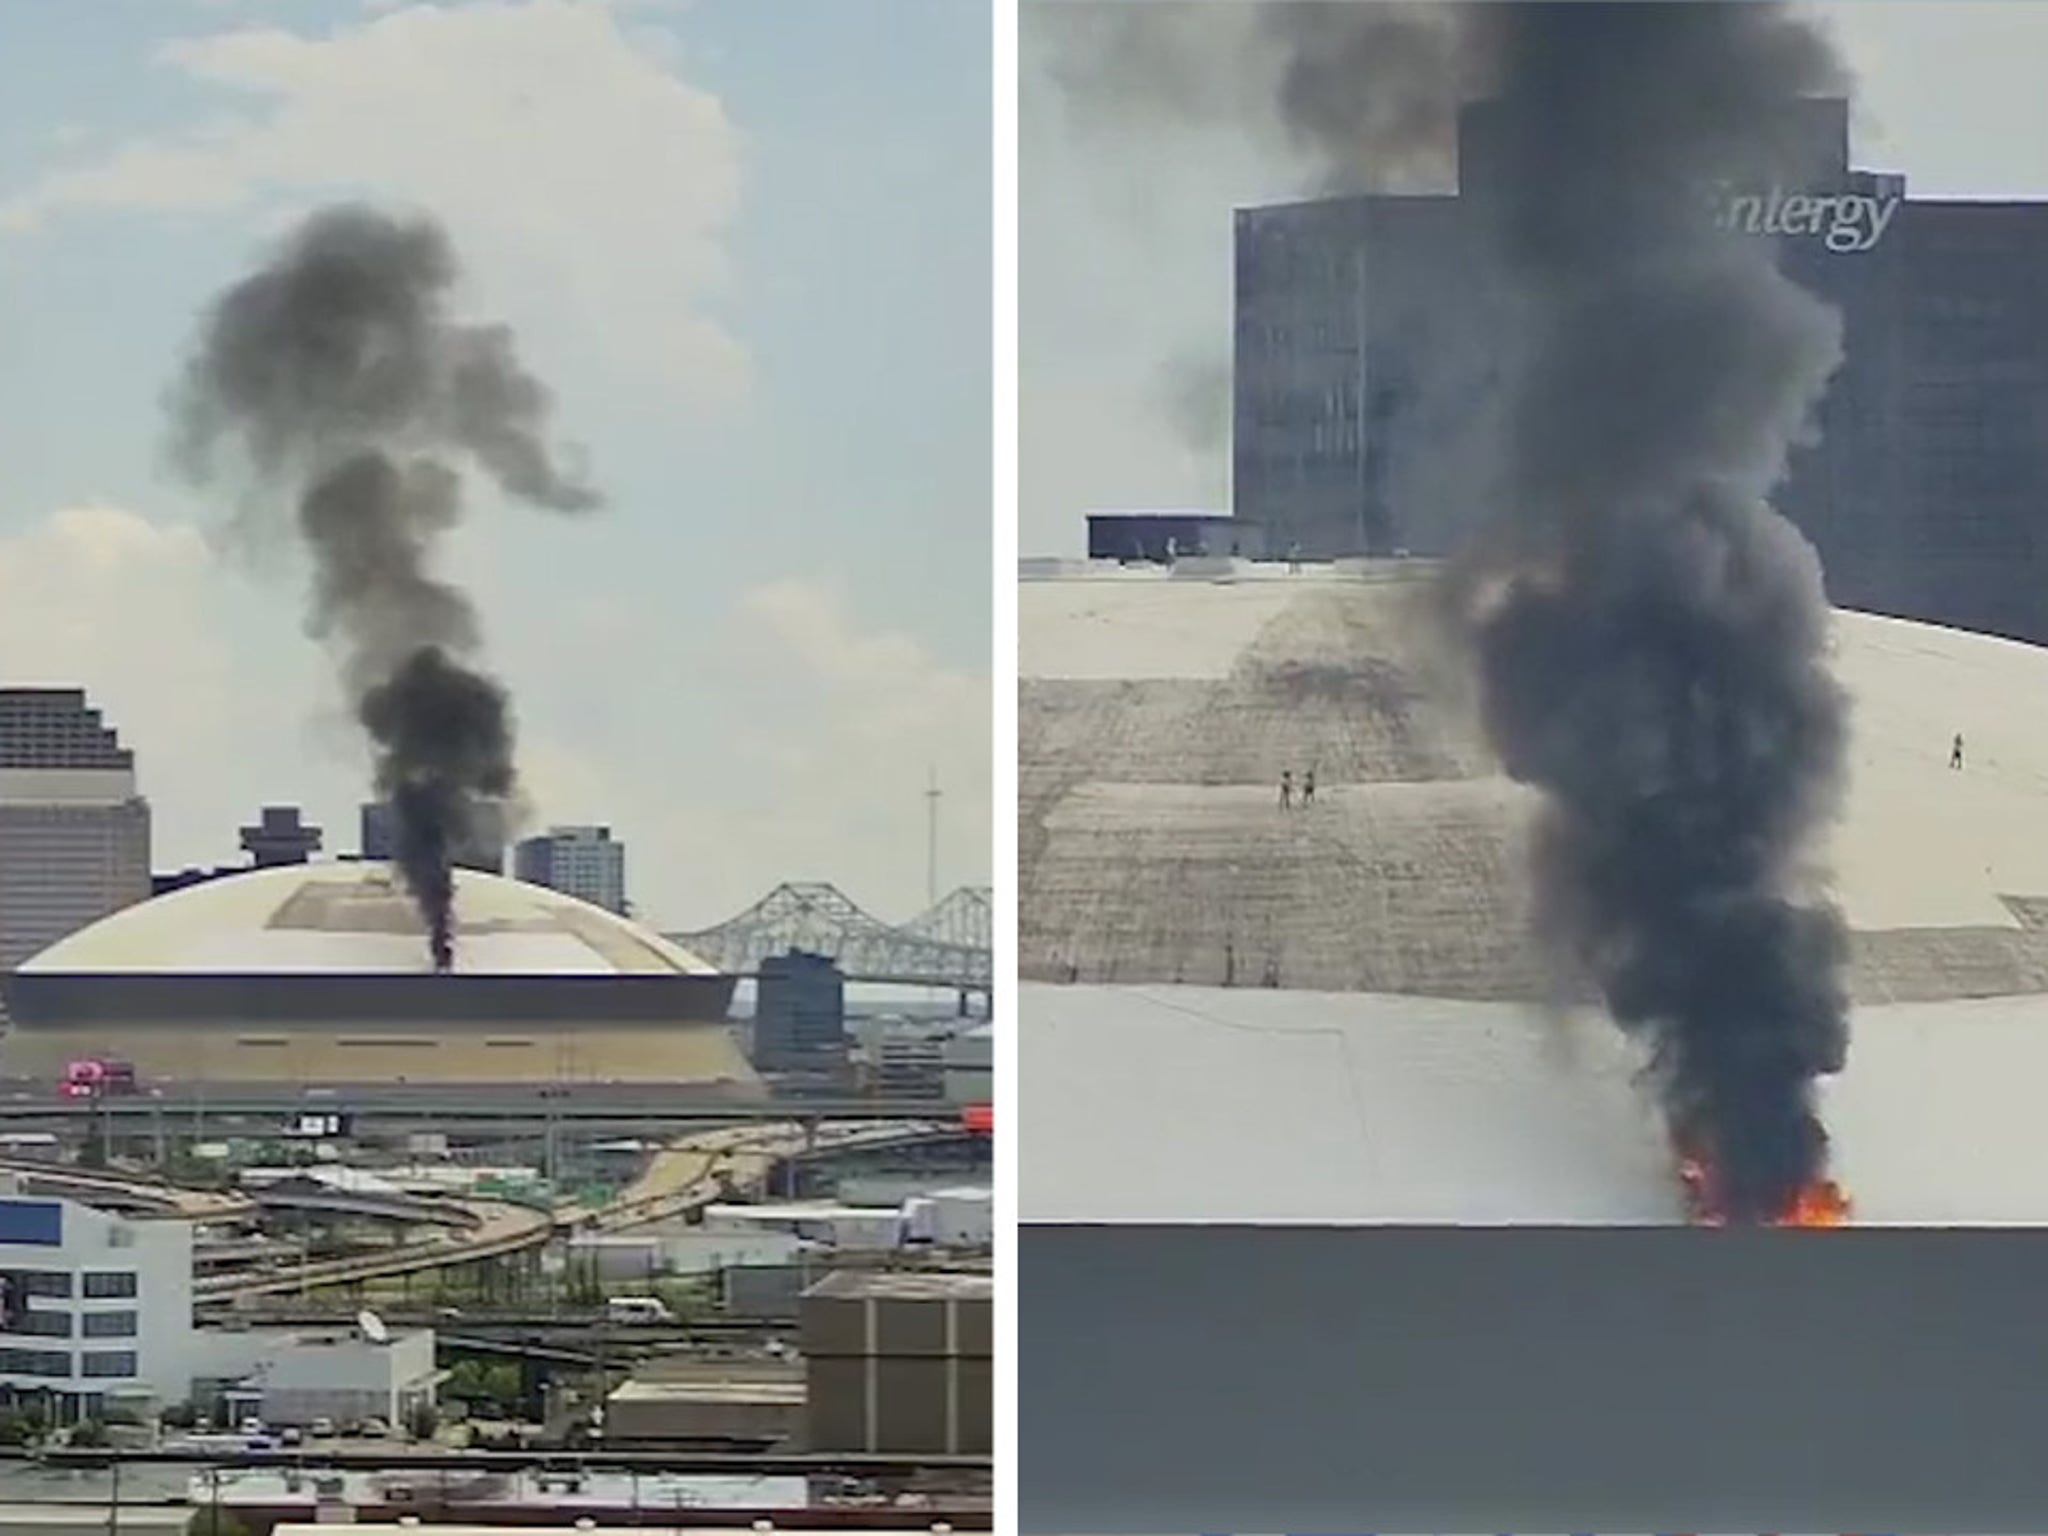 Superdome fire: 1 injured in New Orleans roof fire